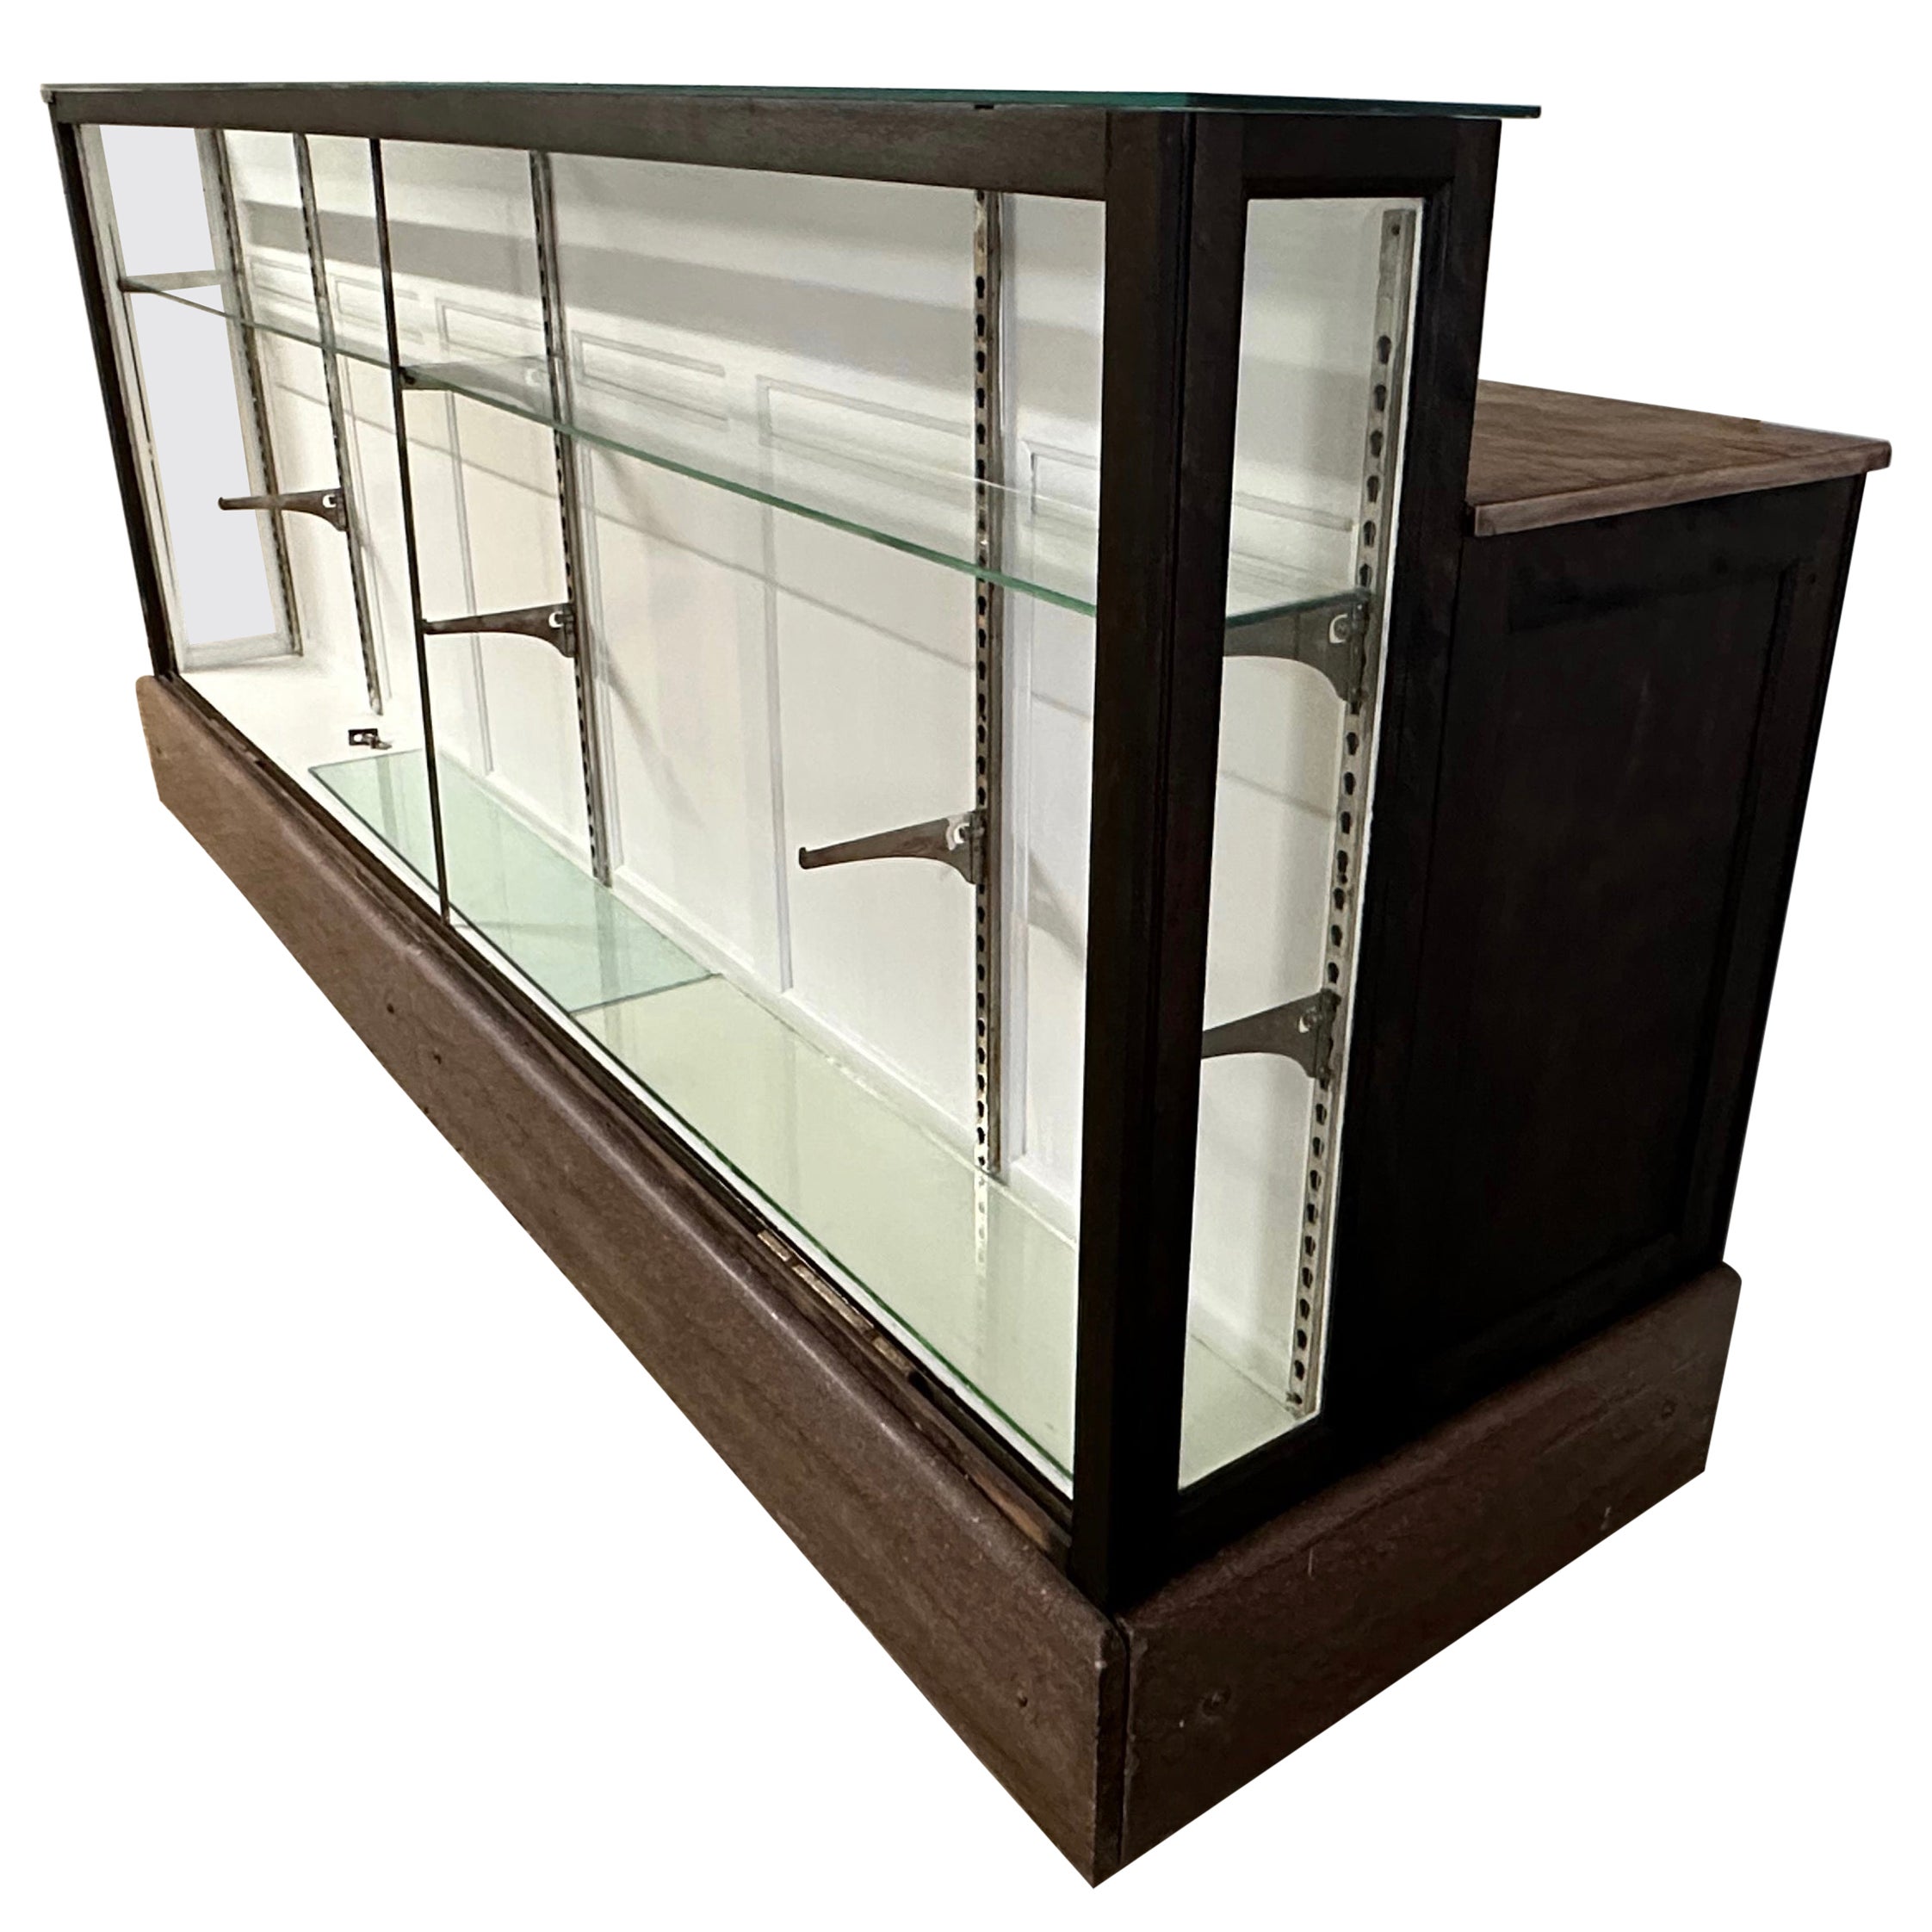 8' Antique Store Counter, Showcase, Display Cabinet or Workstation For Sale